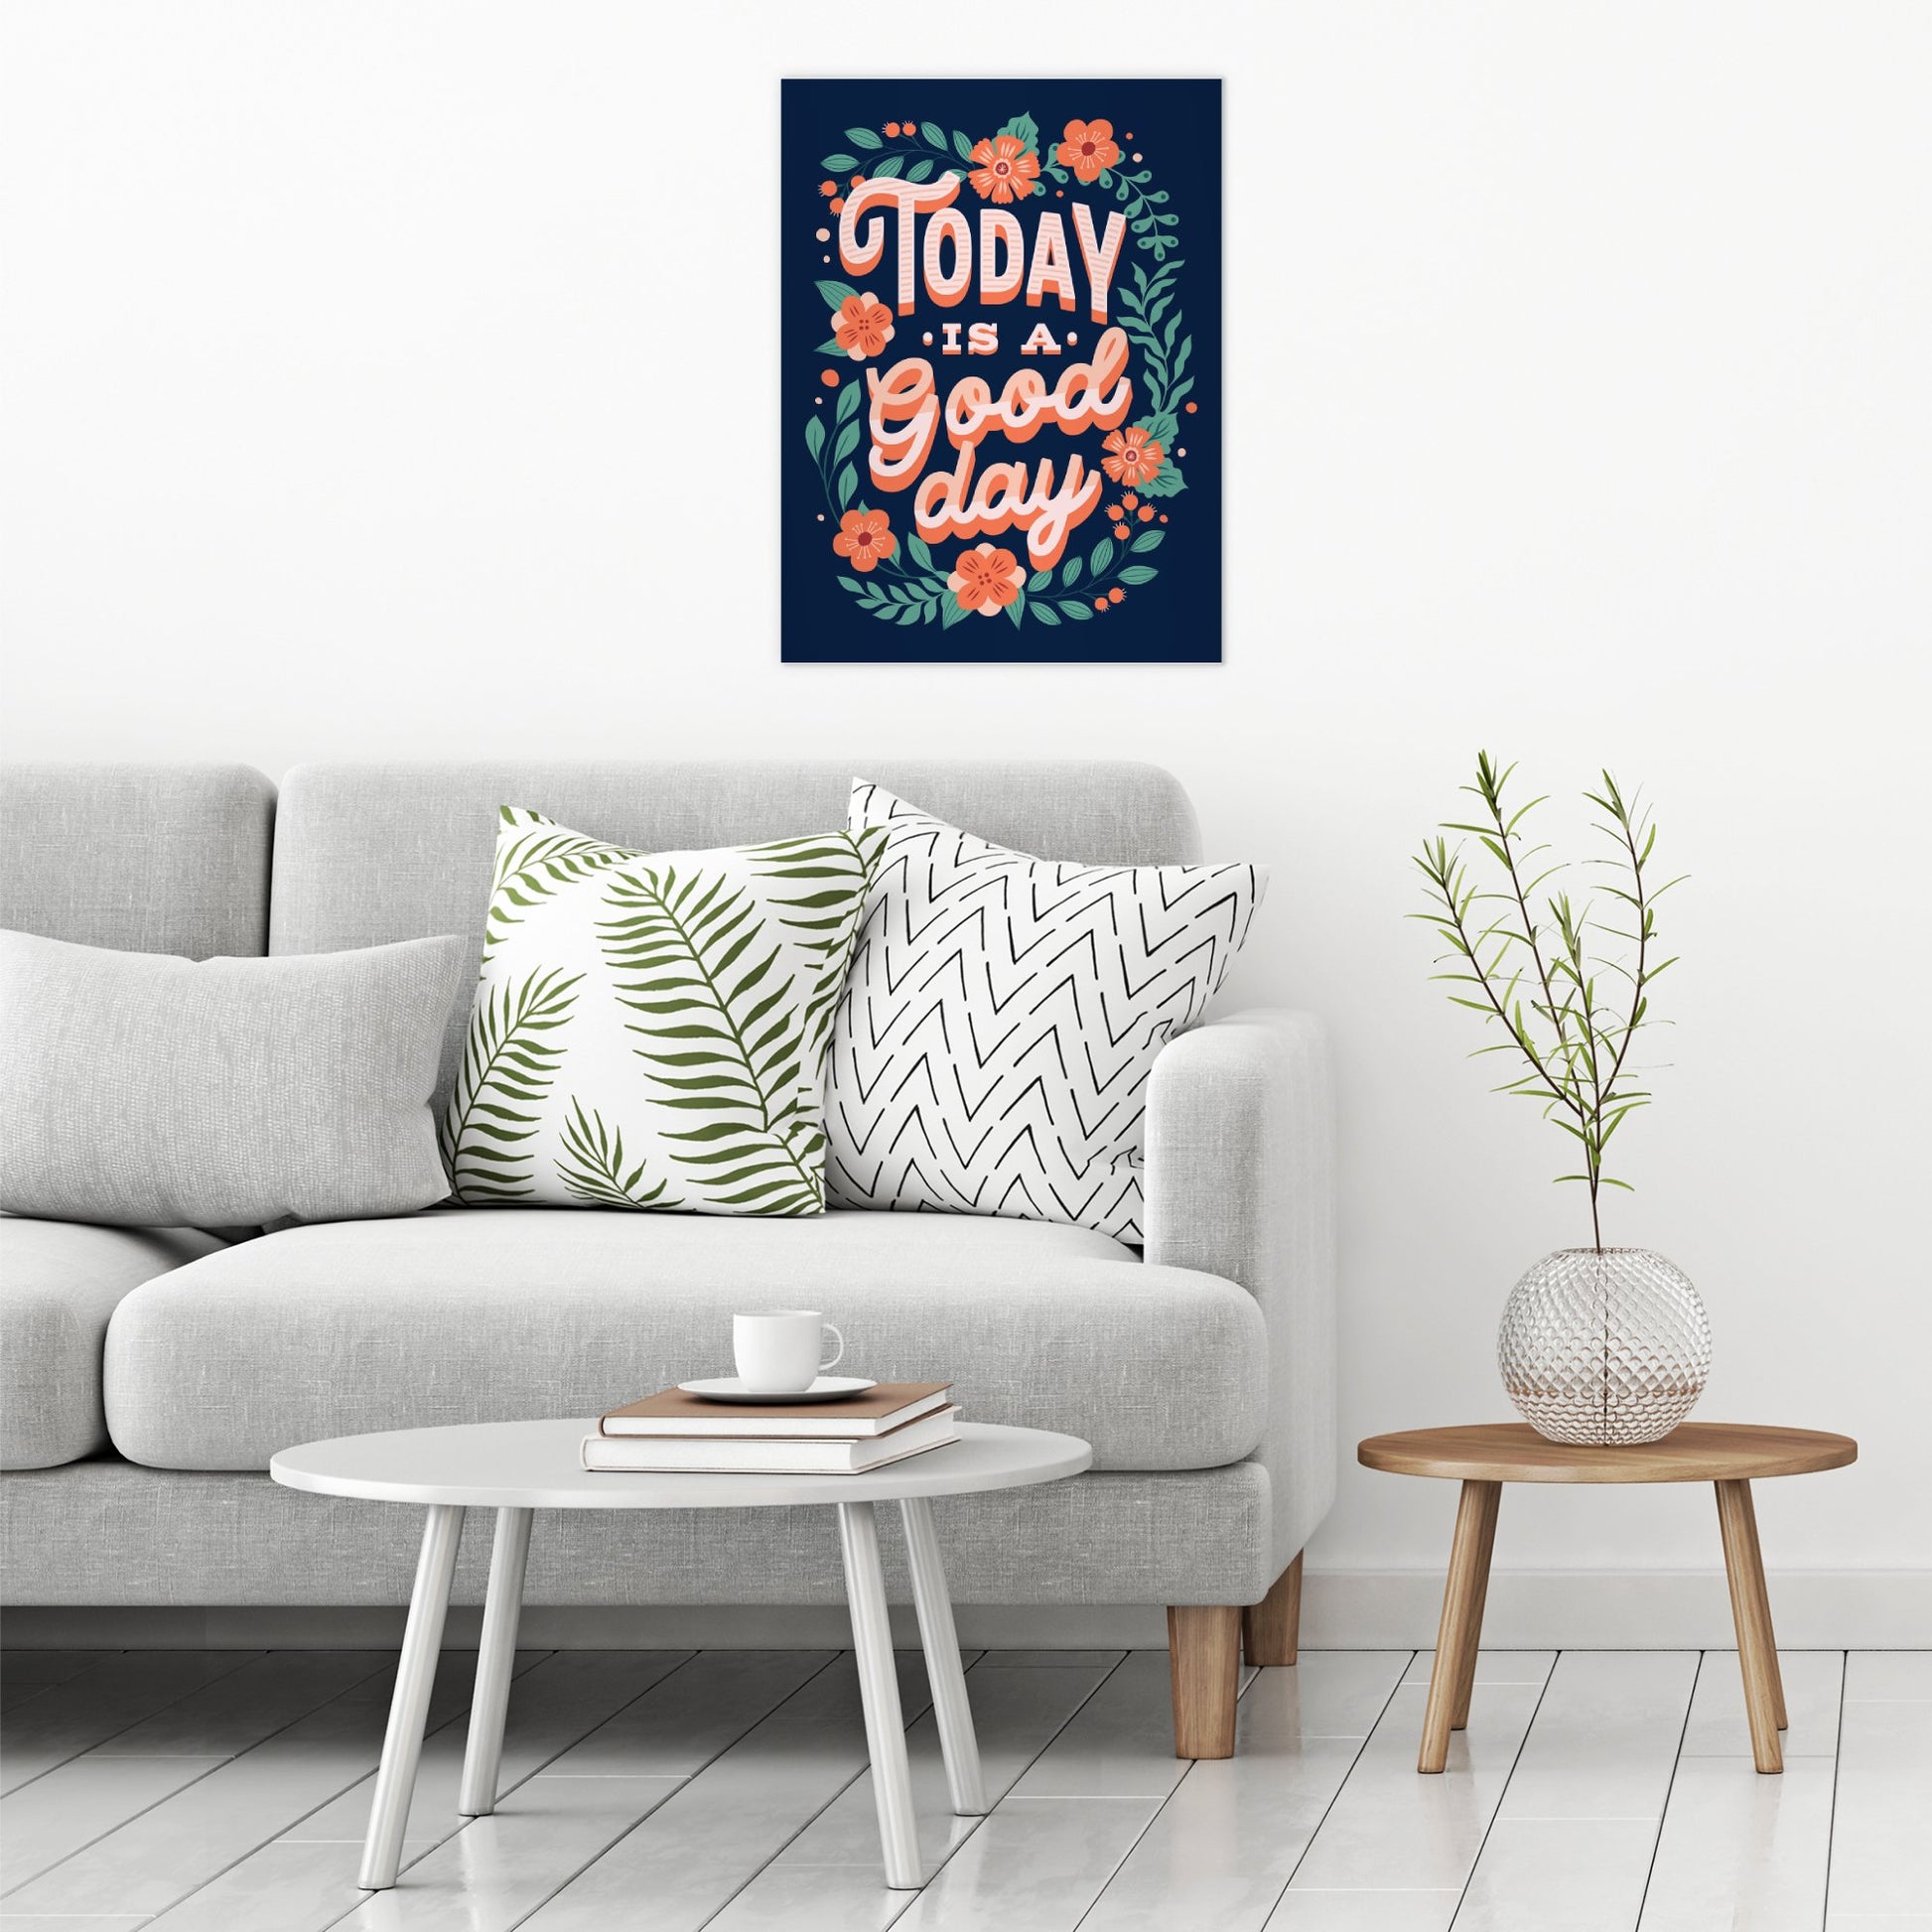 A contemporary modern room view showing a large size metal art poster display plate with printed design of a Today is a Good Day Inspirational Quote